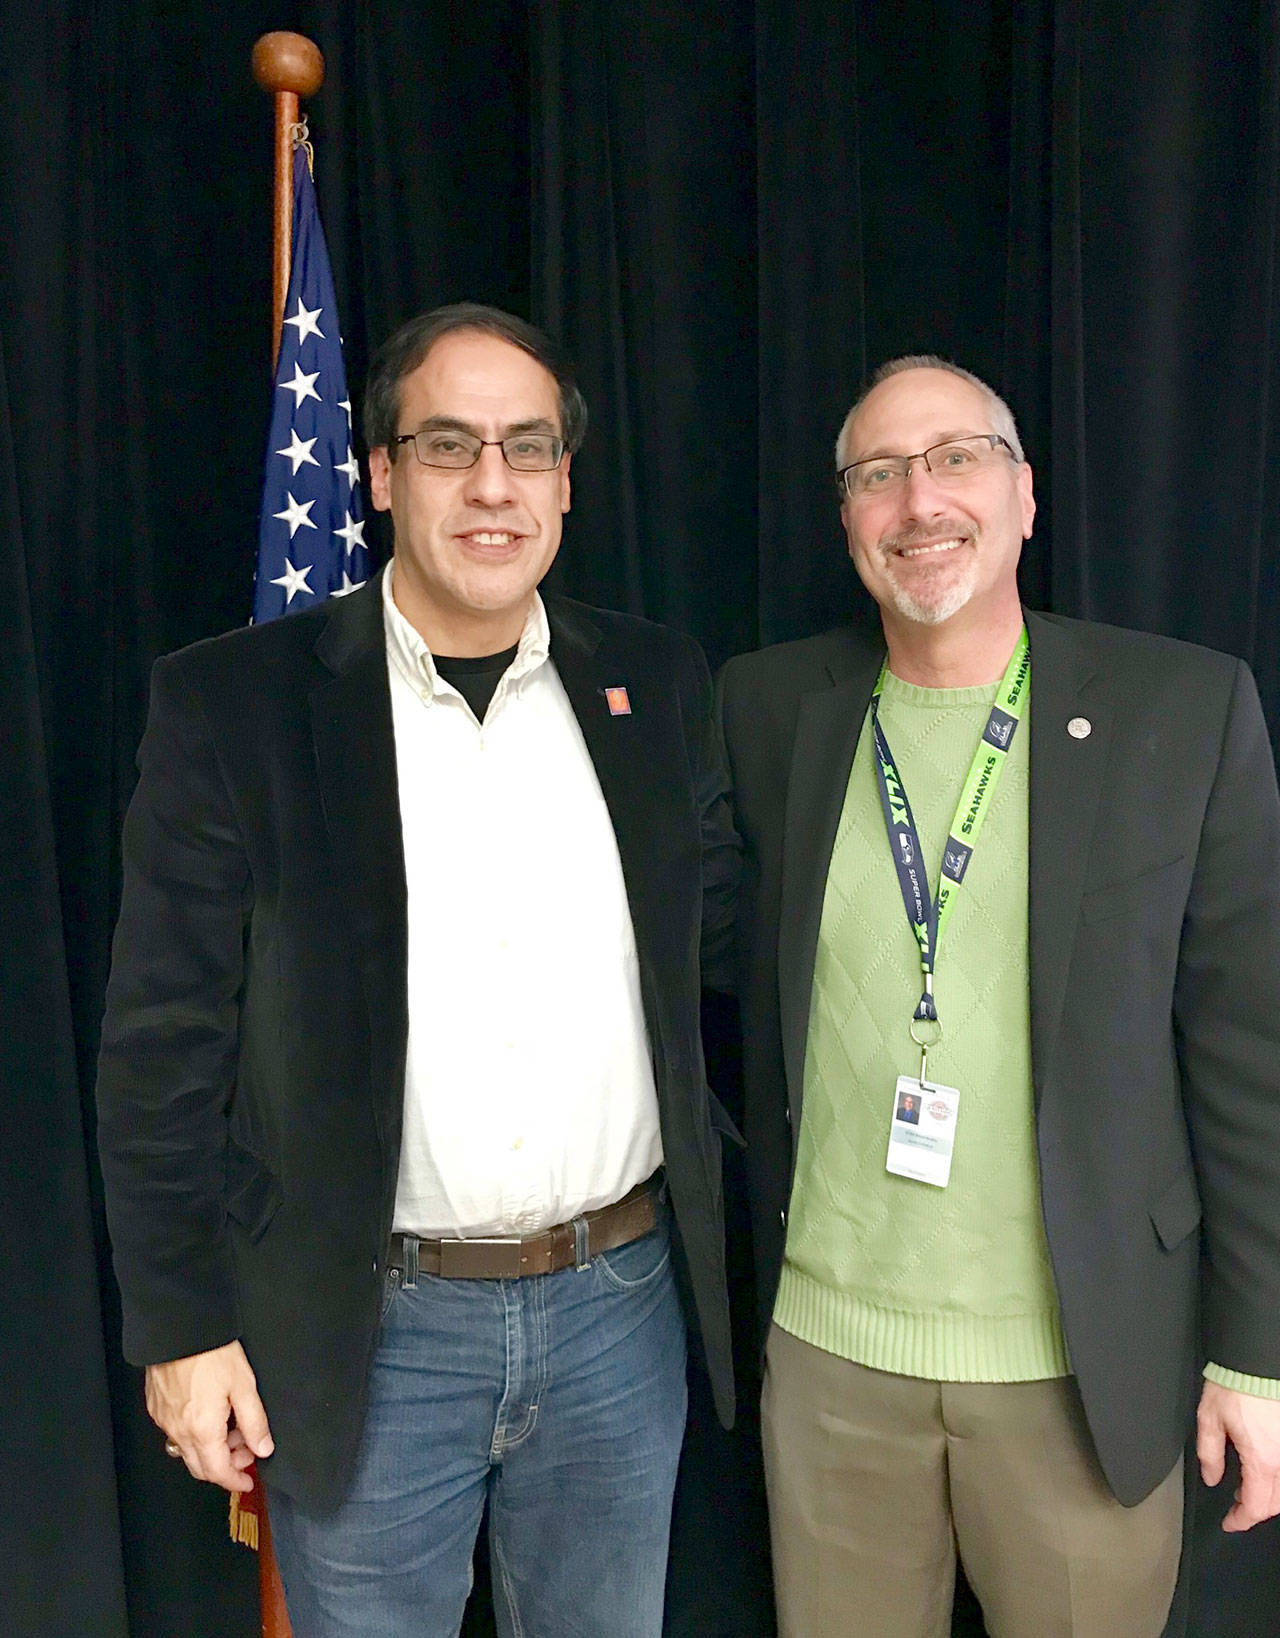 Sammamish City Councilmember Ramiro Valderrama, left, and North Bend City Councilmember Alan Gothelf were appointed to the Eastside Fire & Rescue Board of Directors leadership as Vice Chair and Chair, respectively. (Courtesy Photo)